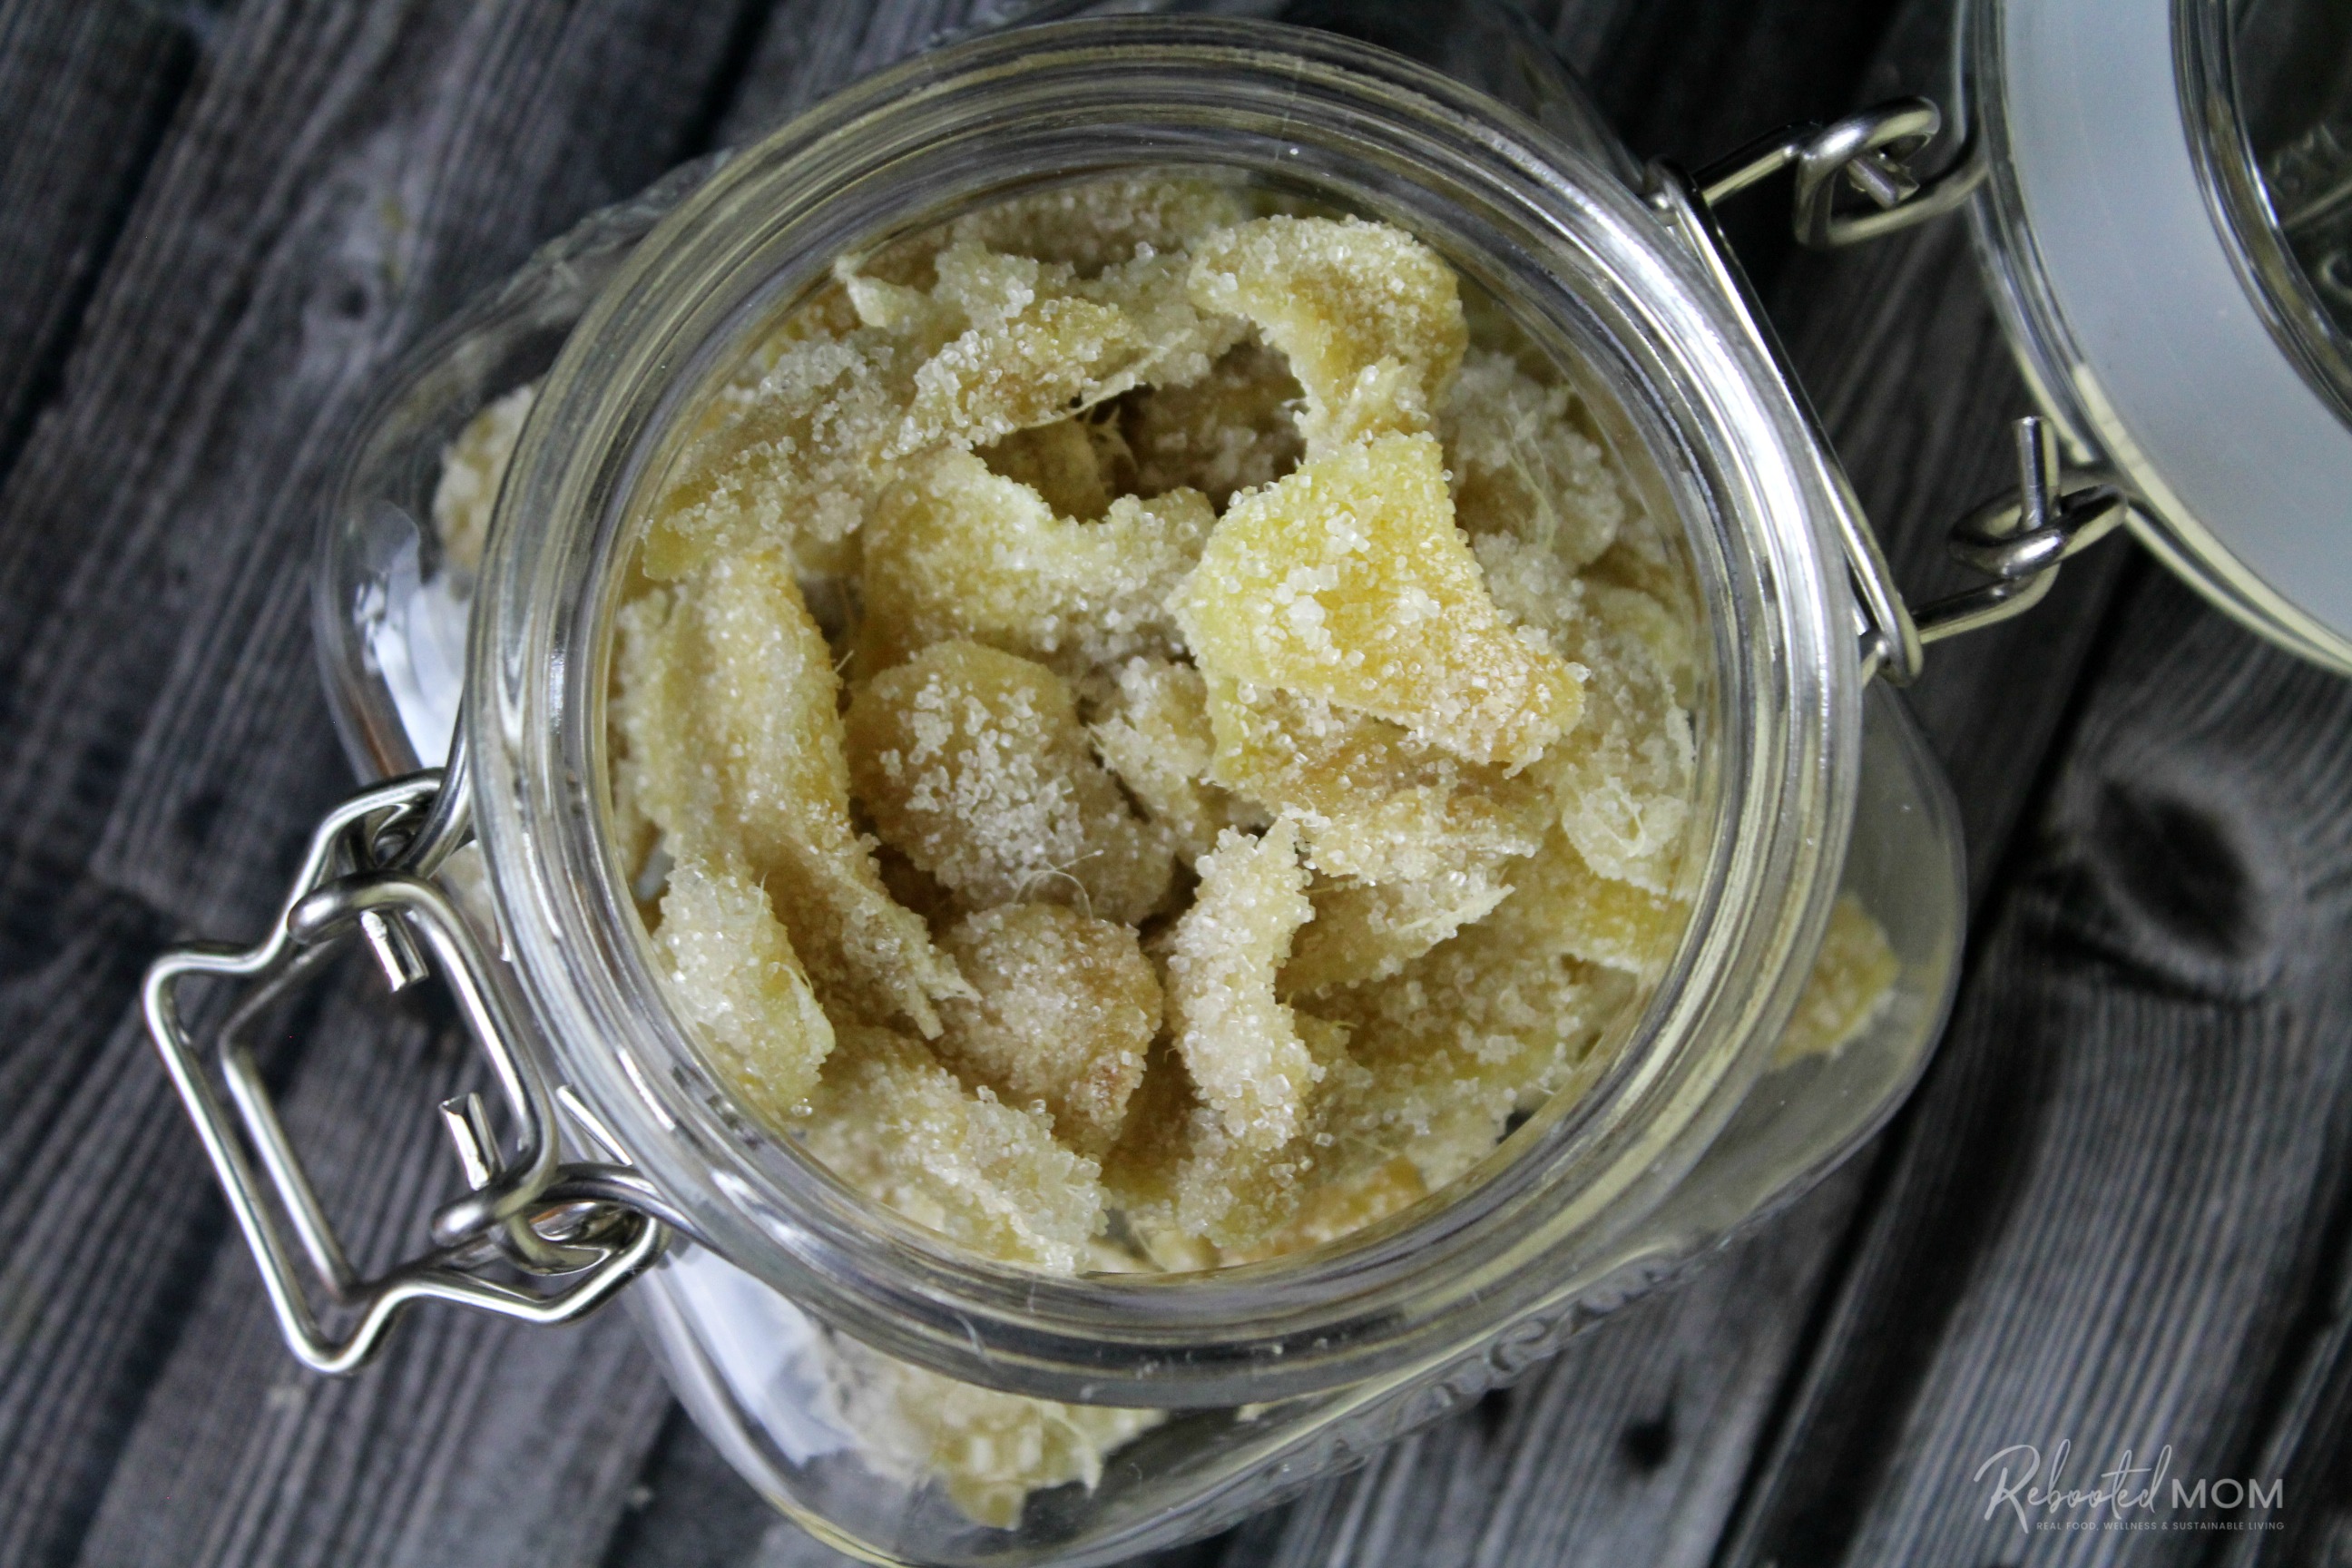 Candied ginger \\ How to make candied ginger - an easy recipe that requires just 3 simple ingredients that result in a delicious treat that's perfect to gift!